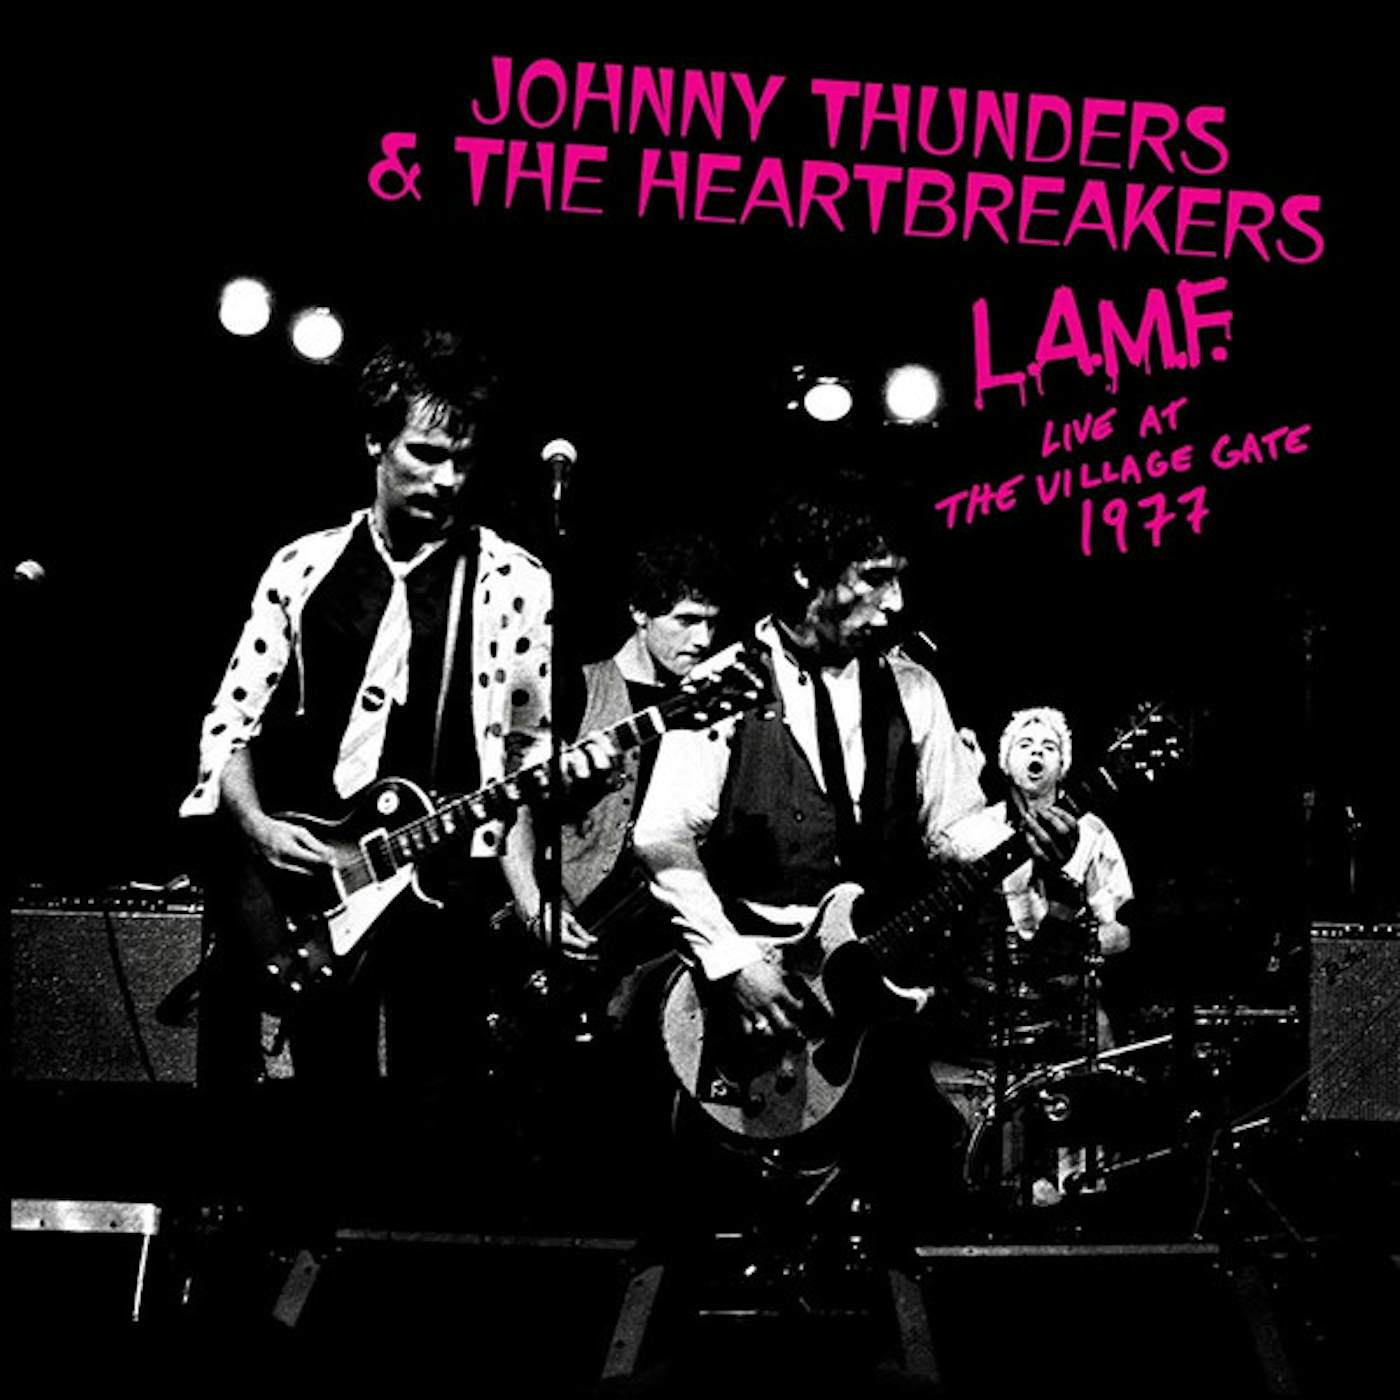 Johnny Thunders & The Heartbreakers L.A.M.F. Live At The Village Gate 1977 (pink vinyl) vinyl record